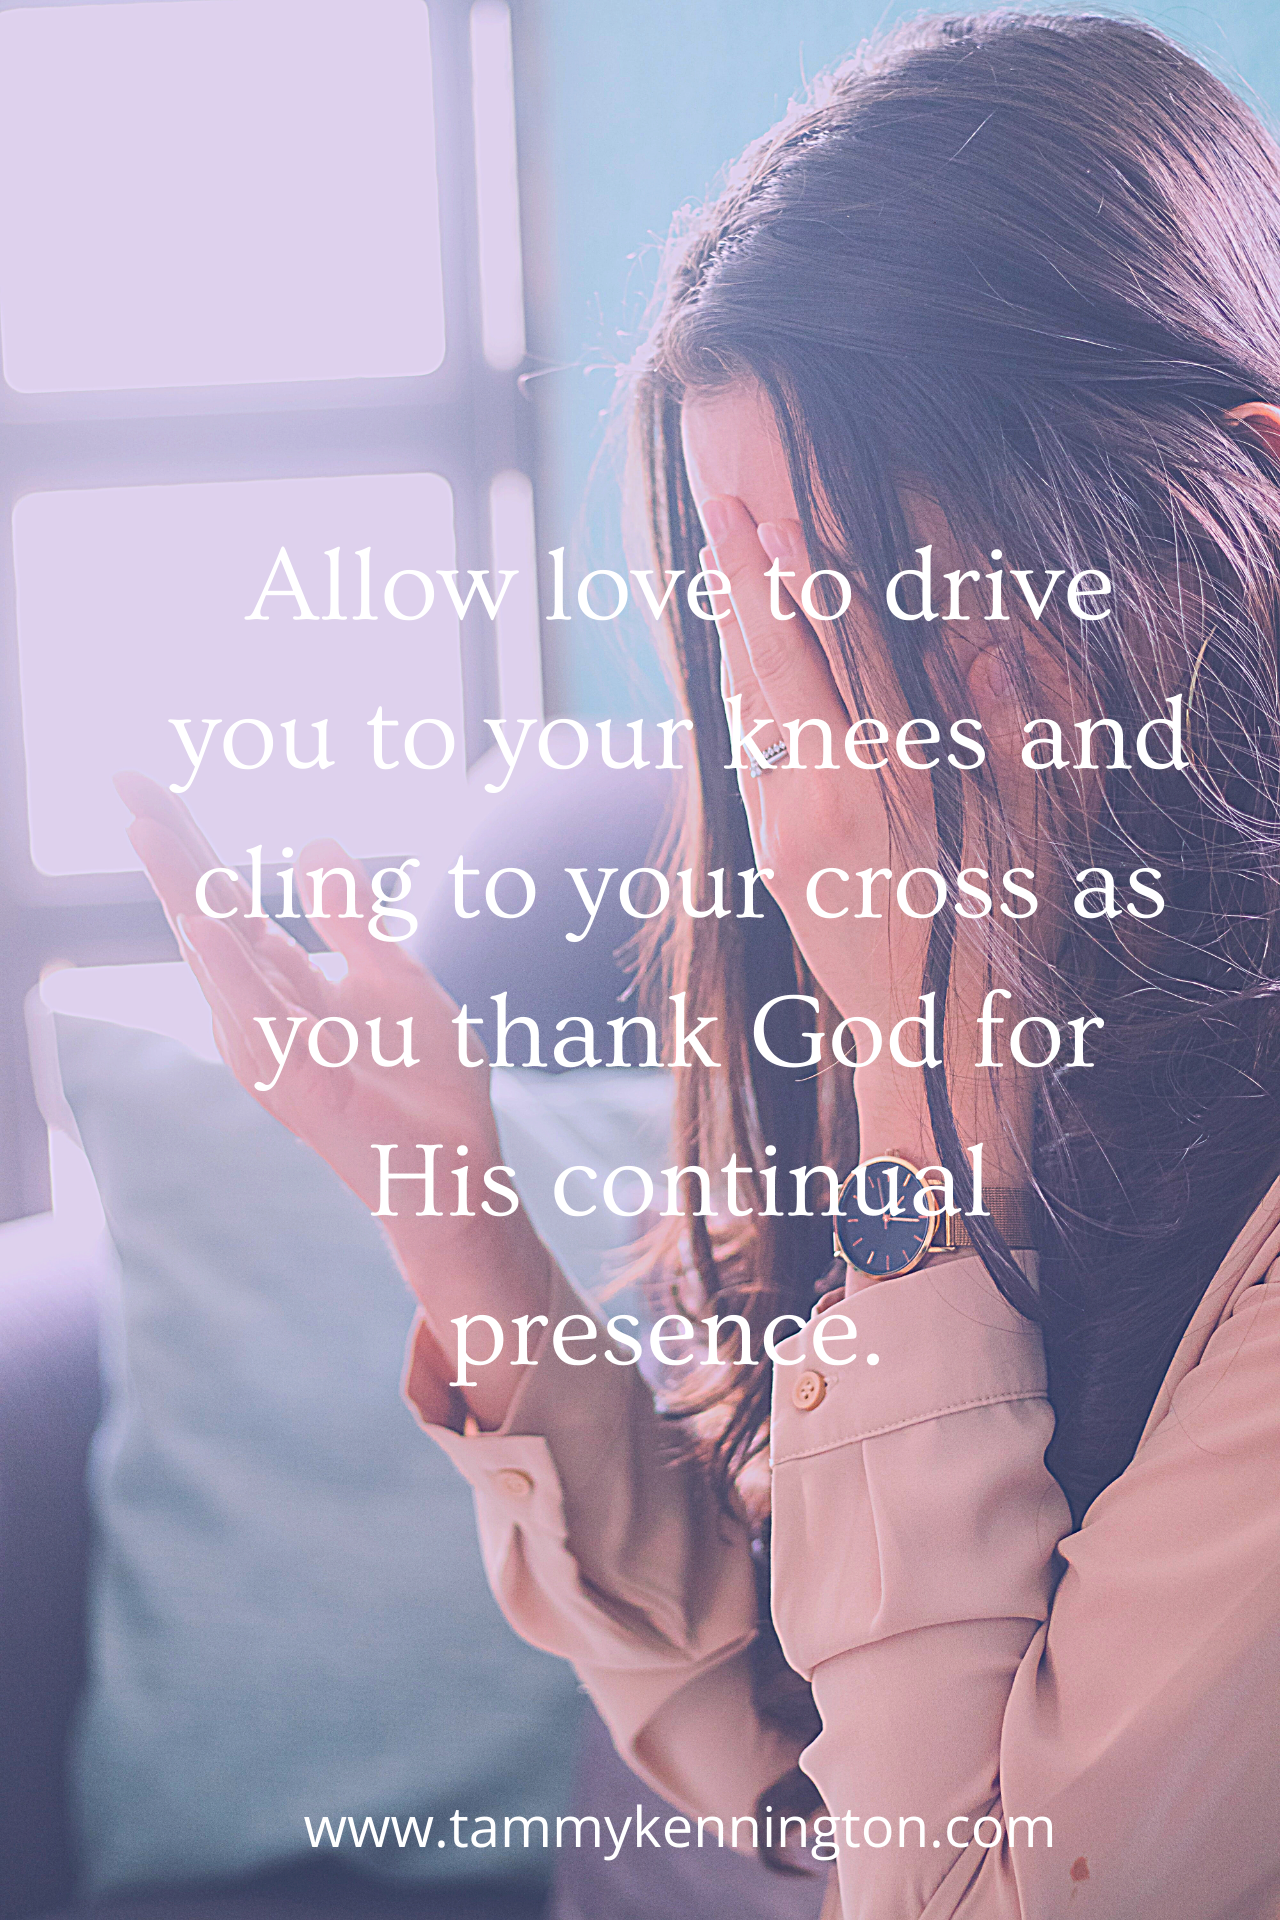 Allow love to drive you to your knees and cling to your cross.